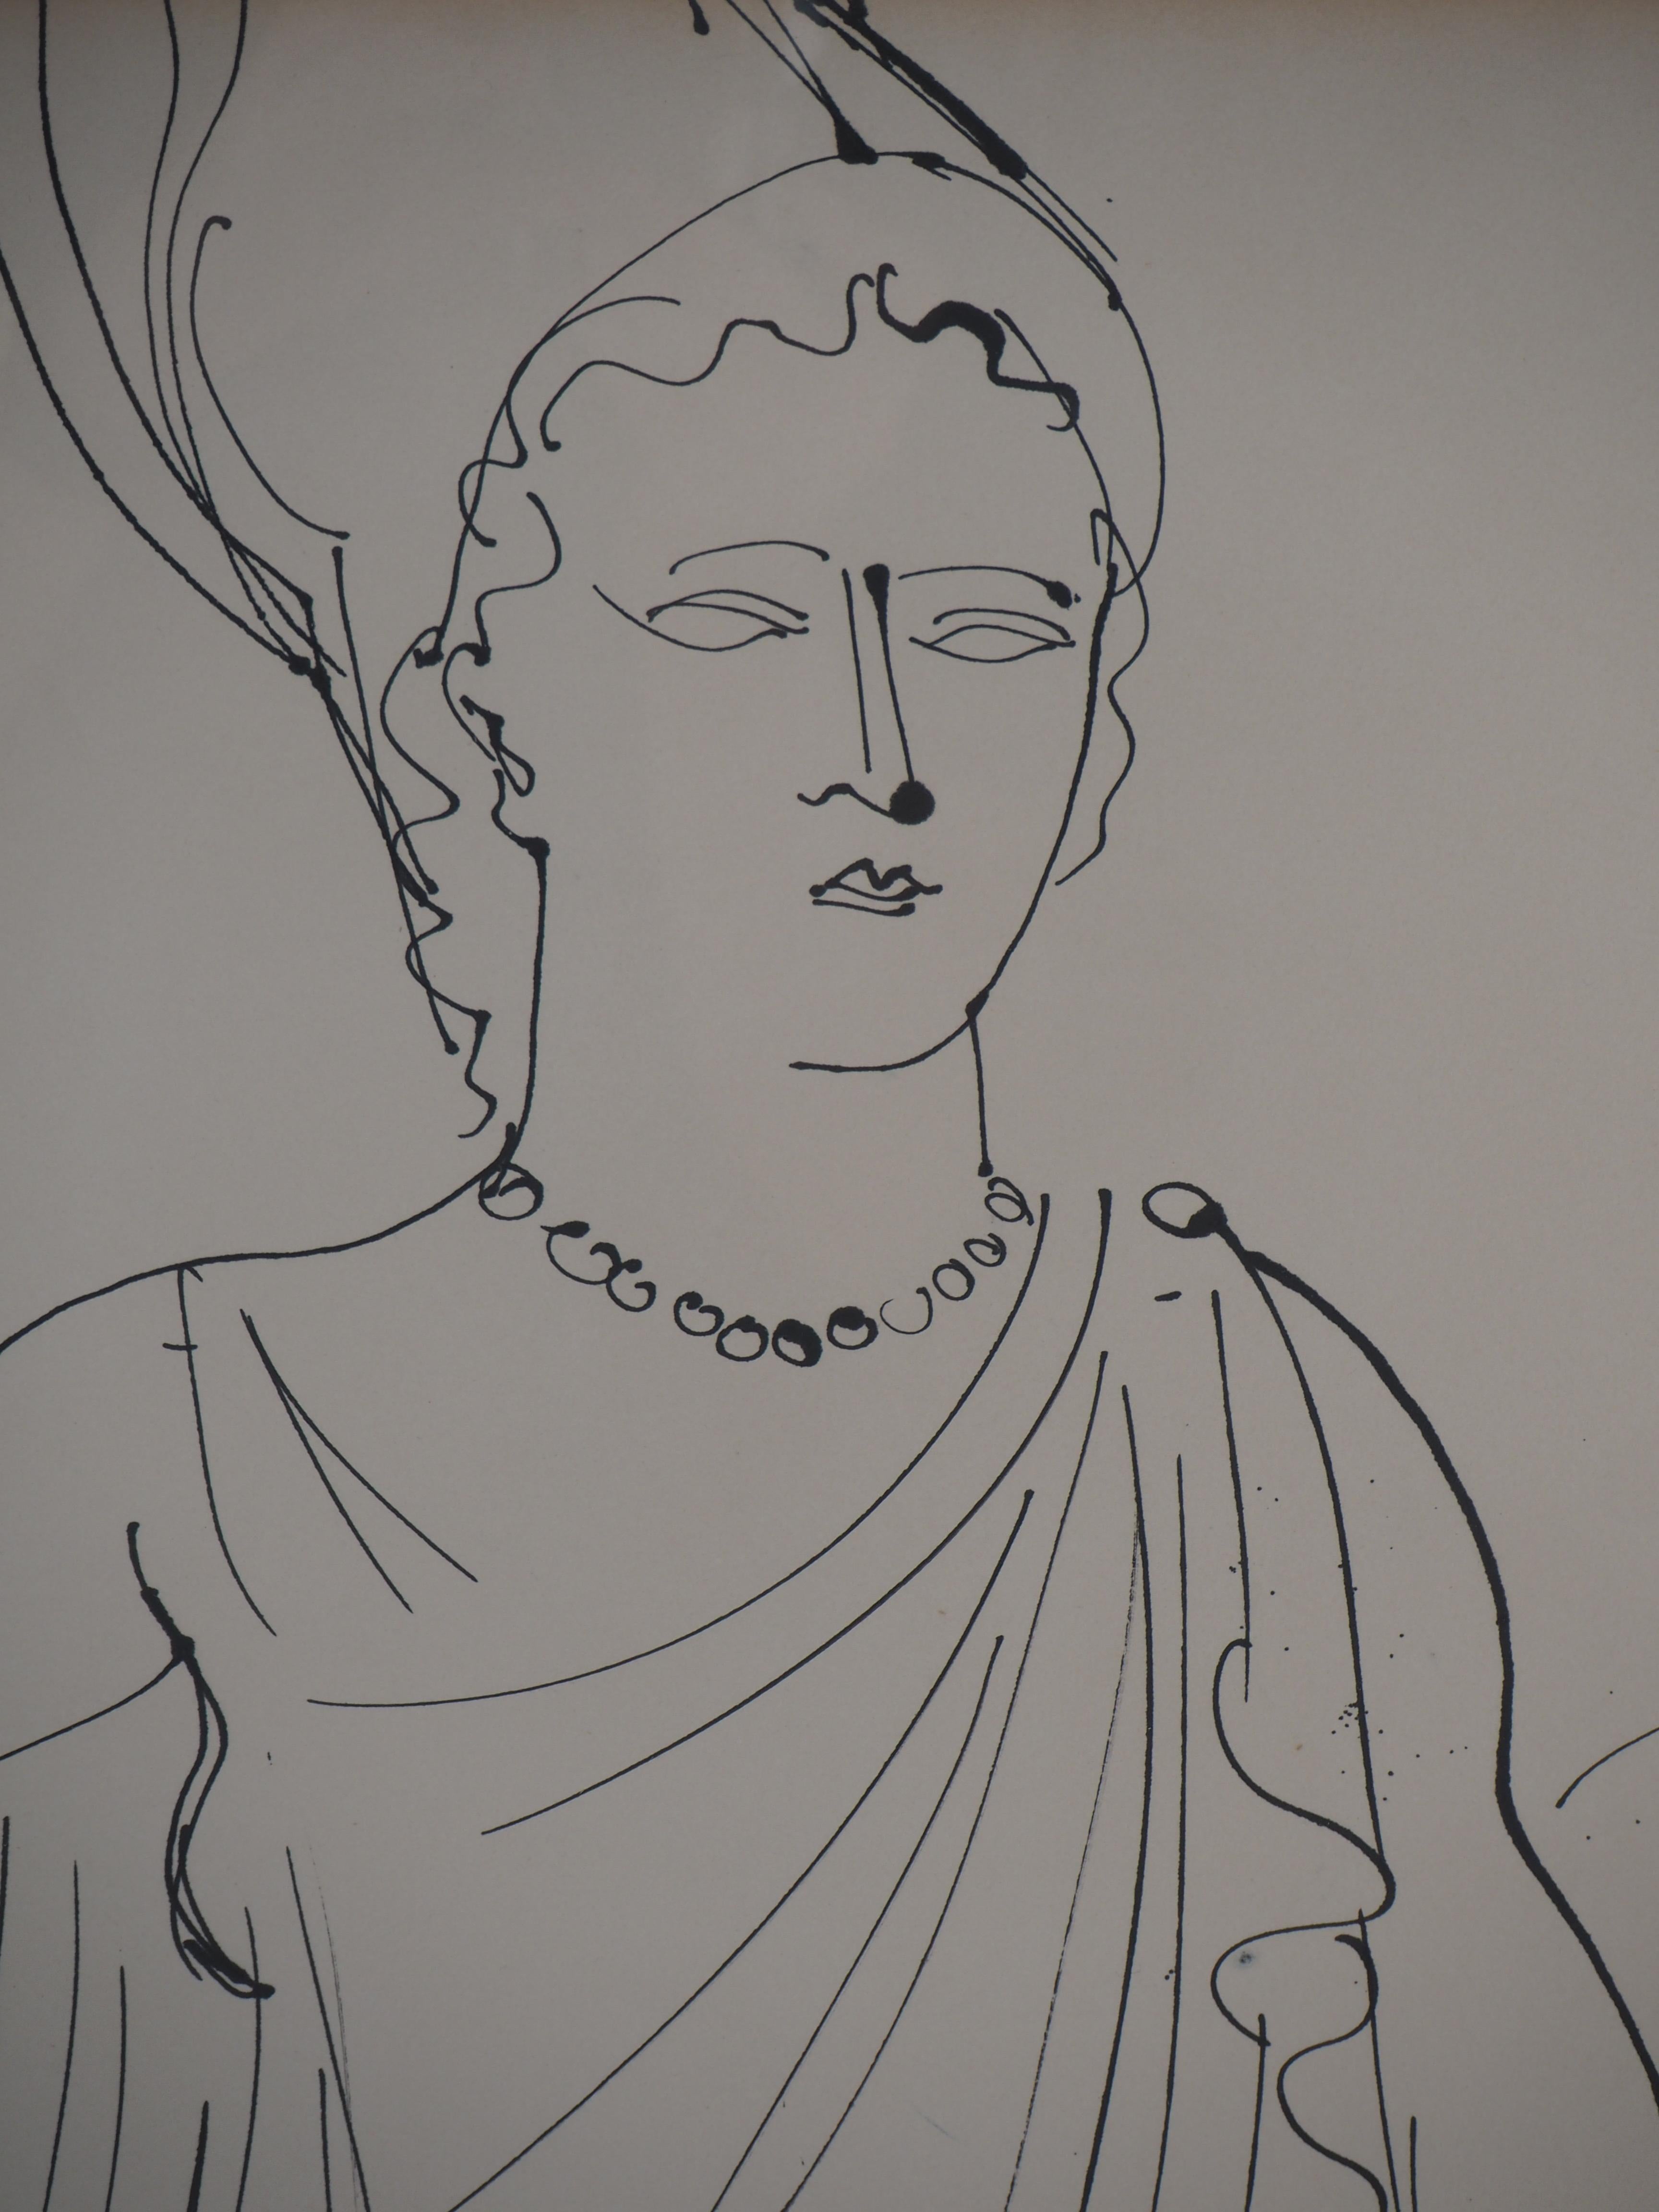 Fee Electricite, Athena Goddess of Wisdom and War - Original Drawing, Handsigned - Gray Figurative Art by Raoul Dufy